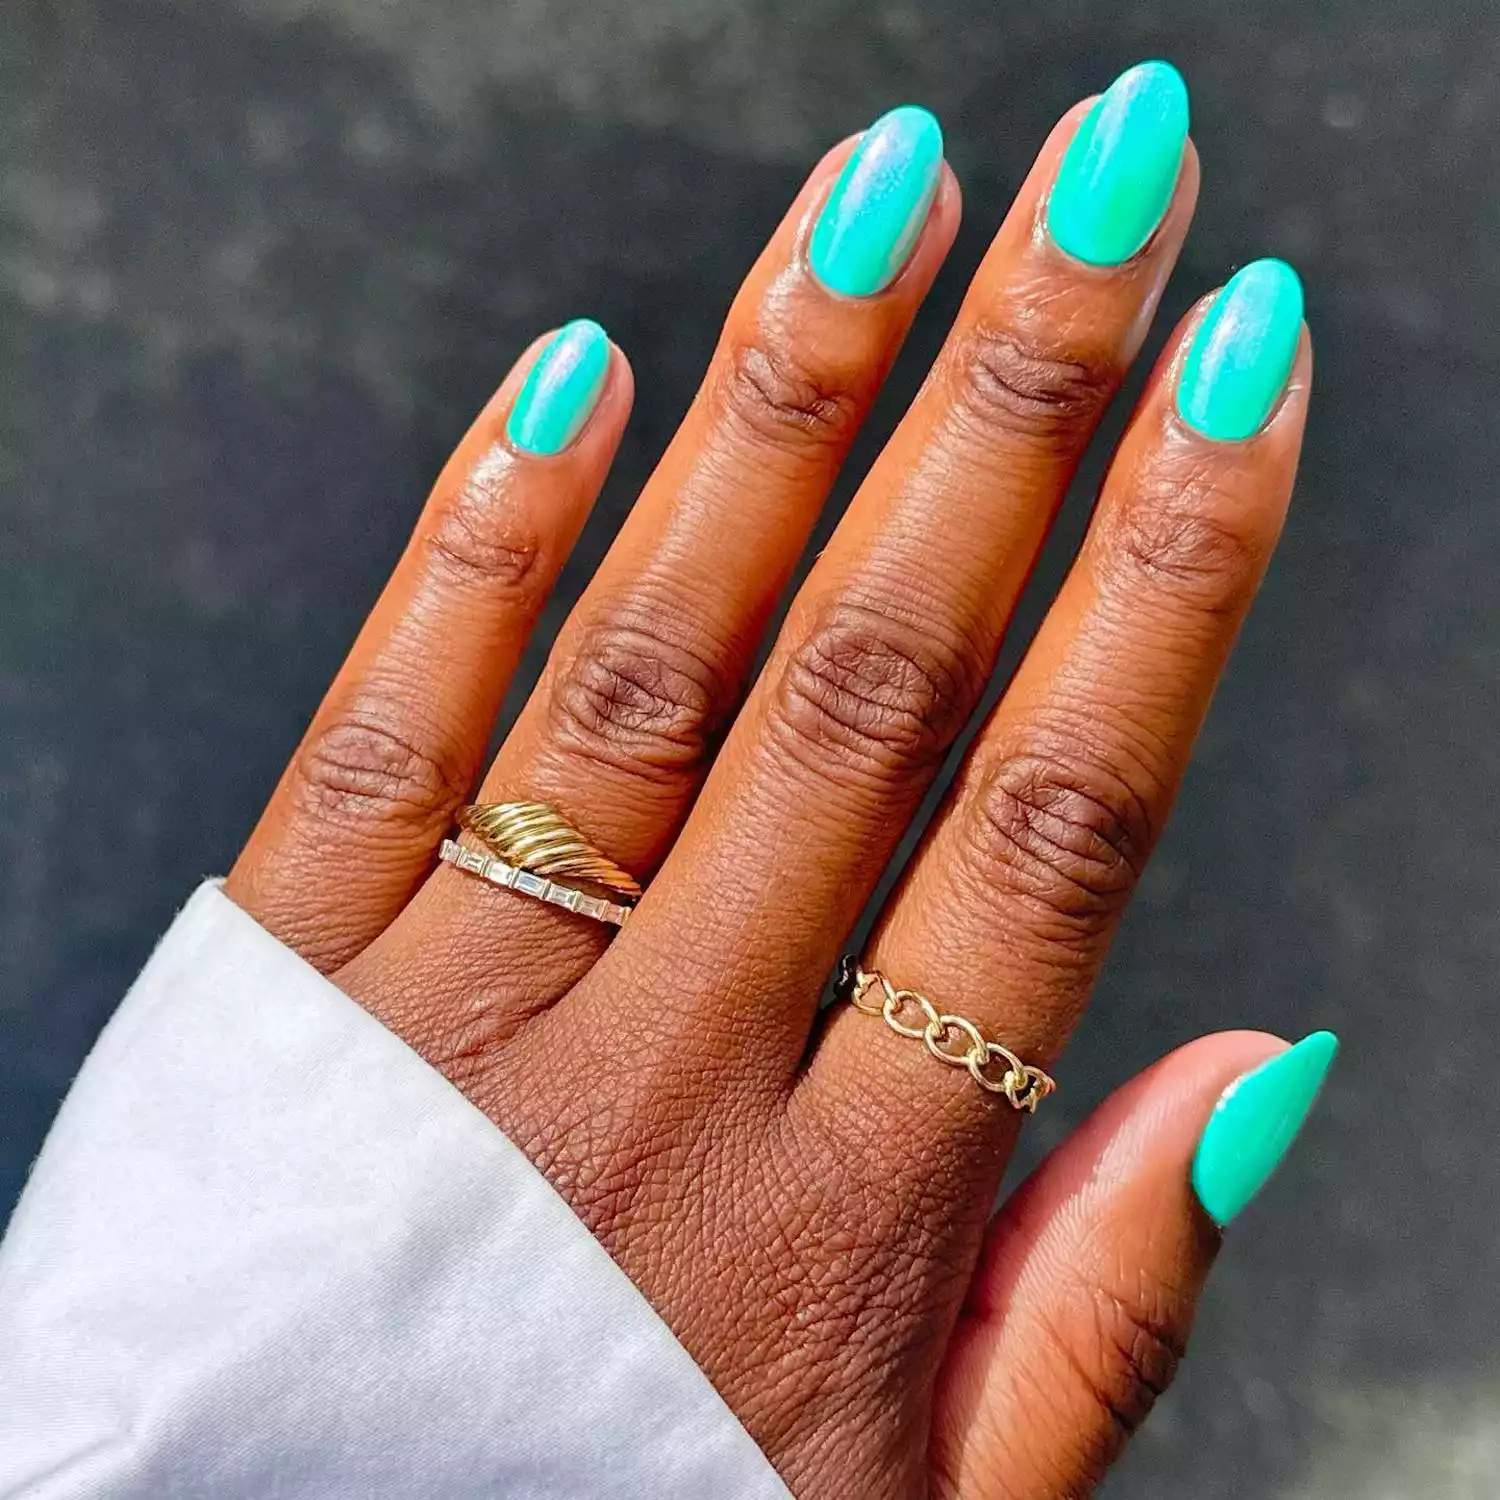 Turquoise teal manicure with iridescent chrome finish and gold rings